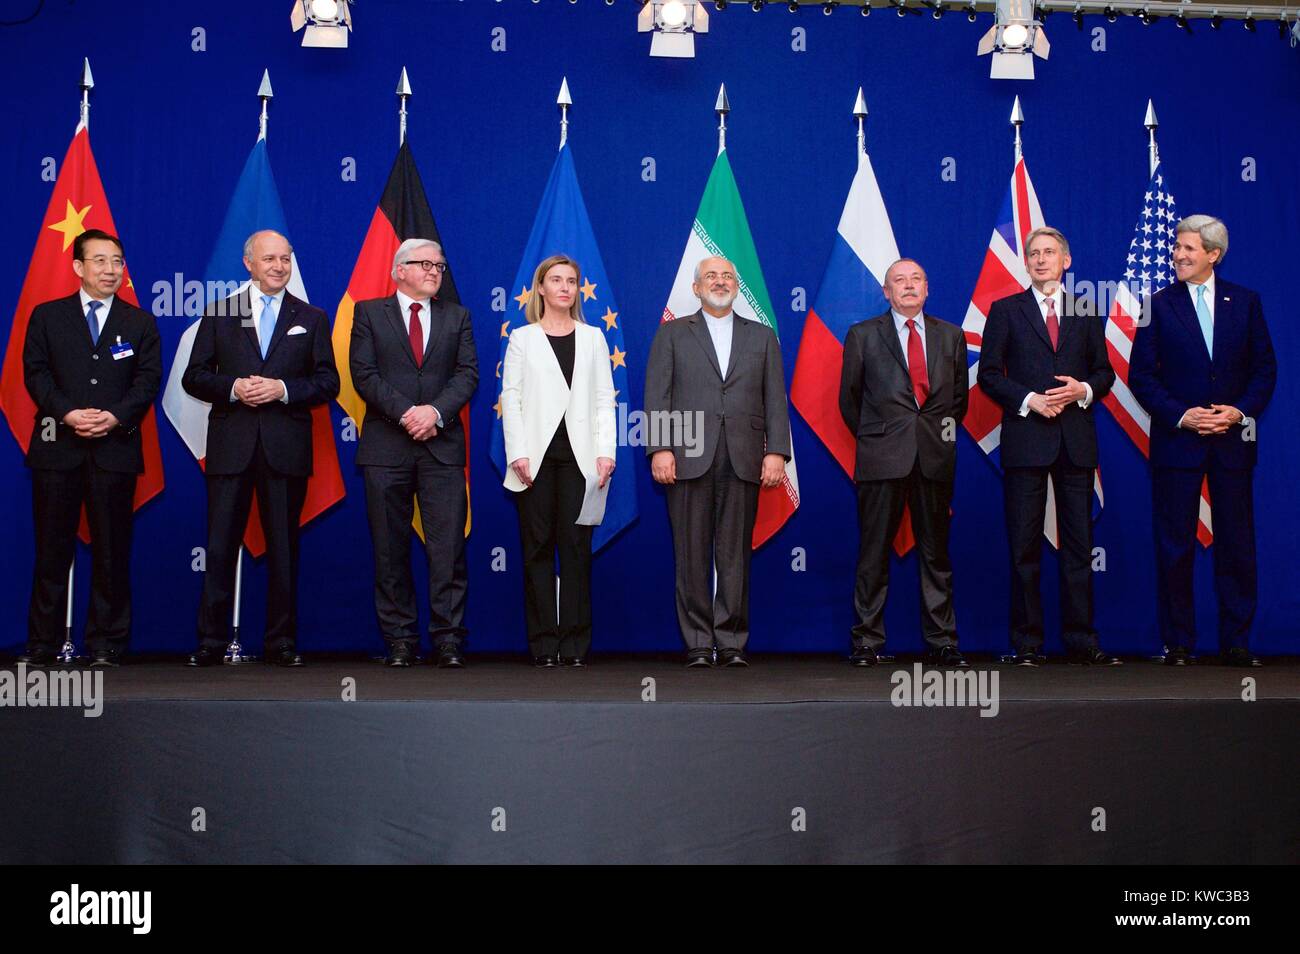 Photo of the P5+1 member nations and Iranian officials at the end of negotiations, April 2, 2015. L-R: Hailong Wu, China; Laurent Fabius, France; Frank-Walter Steinmeier, Germany; Federica Mogherini, European Union High Representative; Iranian Foreign Minister Javad Zarifat; unidentified Russian official; Philip Hammond, Britain; and John Kerry, USA. (BSLOC 2015 13 287) Stock Photo